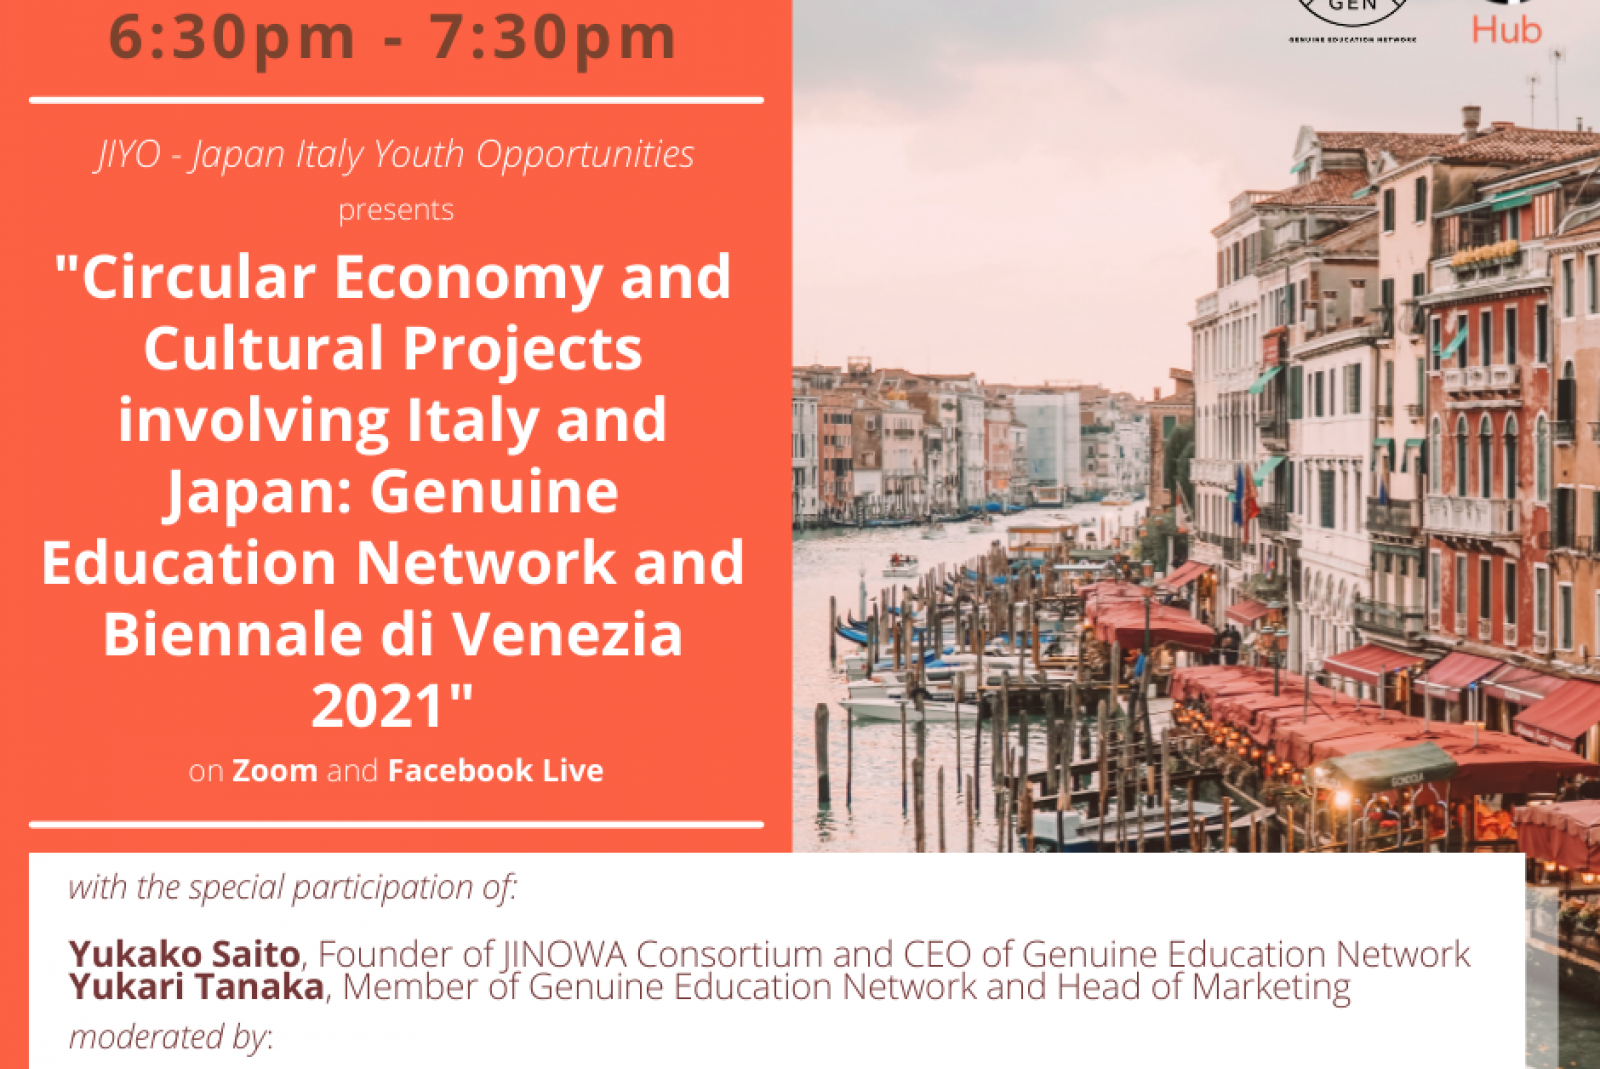 JIYO - Circular Economy and Cultural Projects involving Italy and Japan: Genuine Education Network and Biennale di Venezia 2021 - 19 May 2021